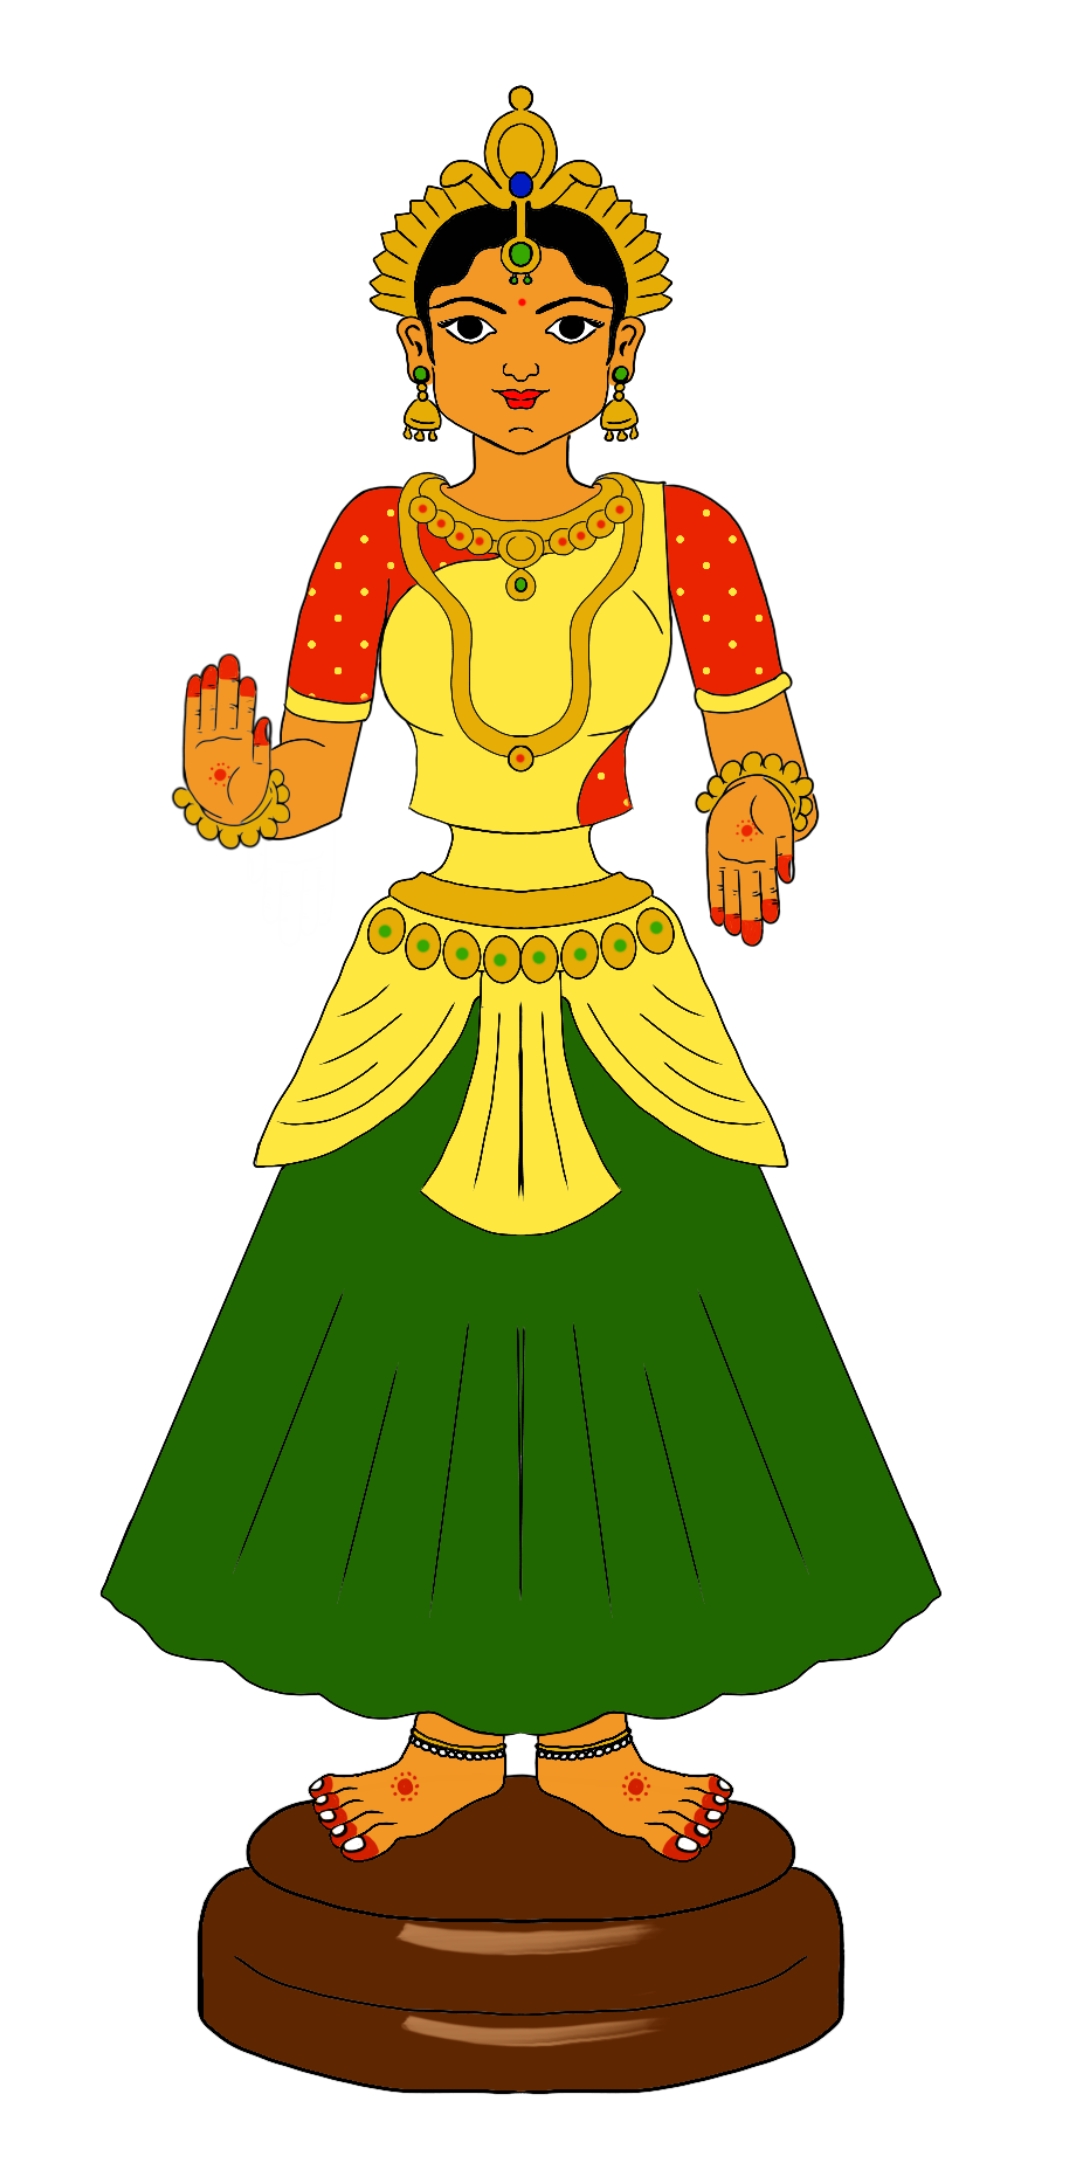 Image of Drawing Of Well Traditional And Ethnic Dressed Lady Doing  Bharatanatyam Dance. Silhouette Or Outline Editable Illustration Of Dancing  Pose-AQ828728-Picxy